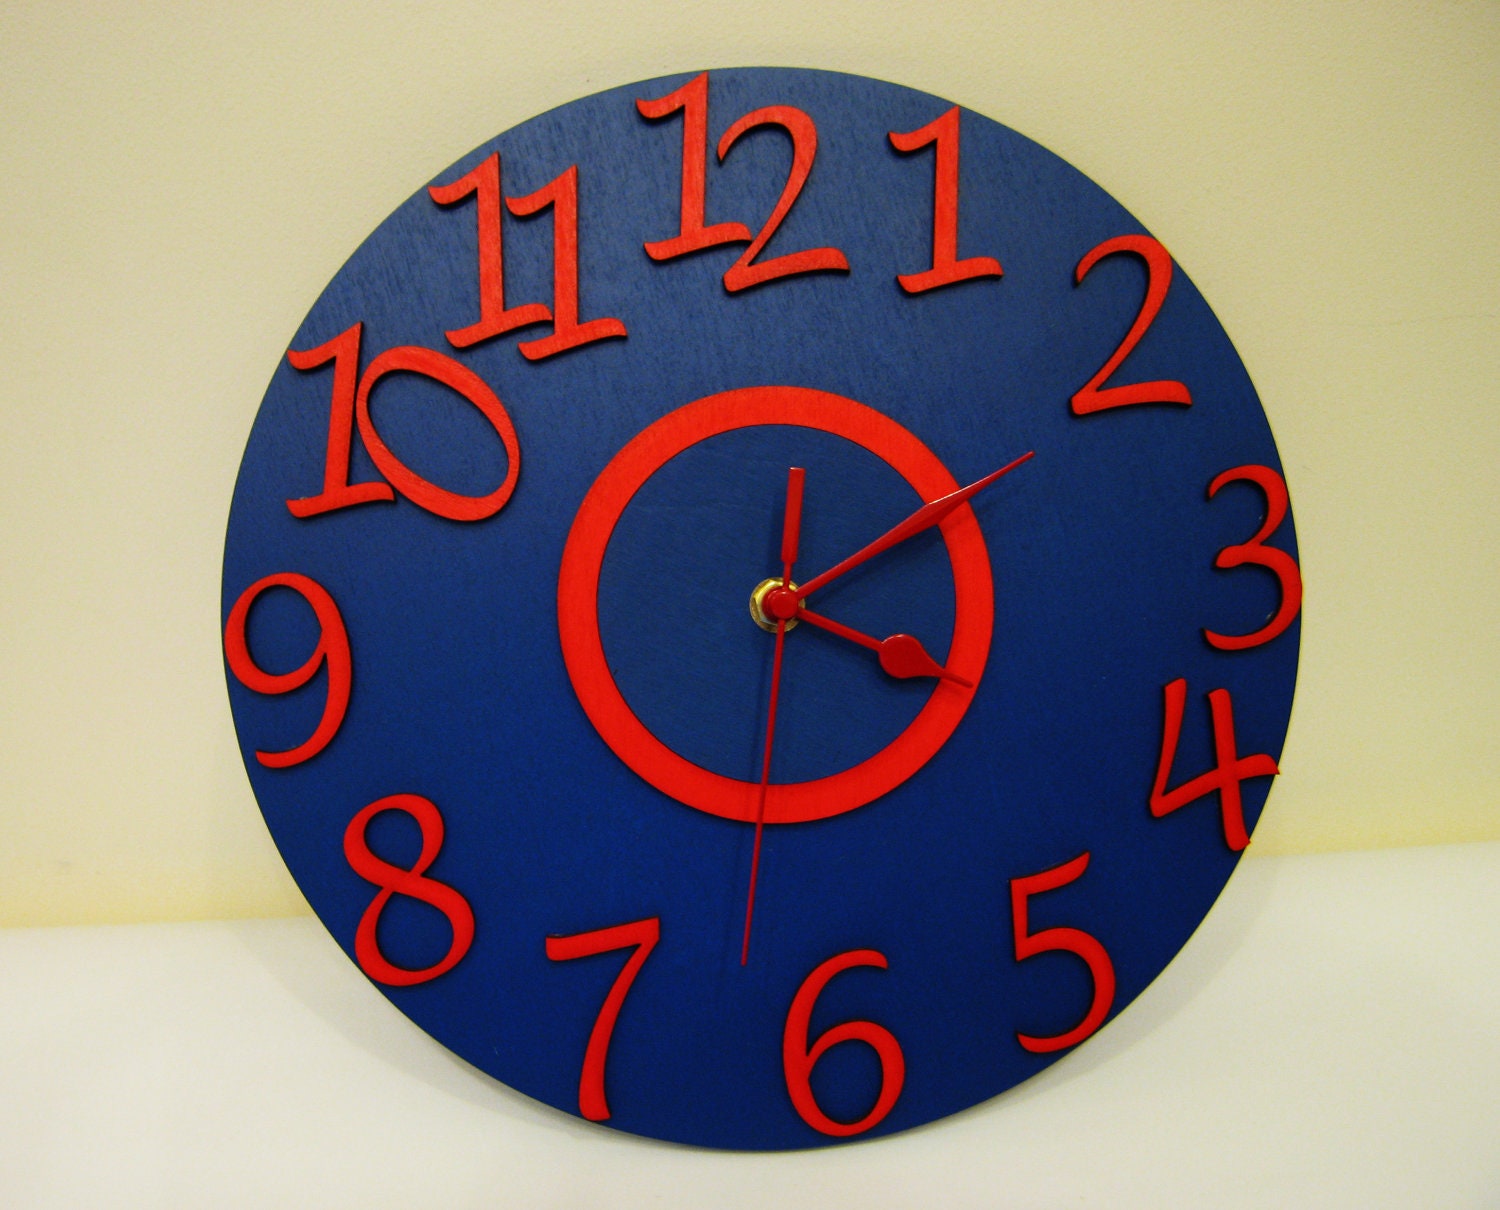 Wooden large round red blue wall clock kids children office home wall decor